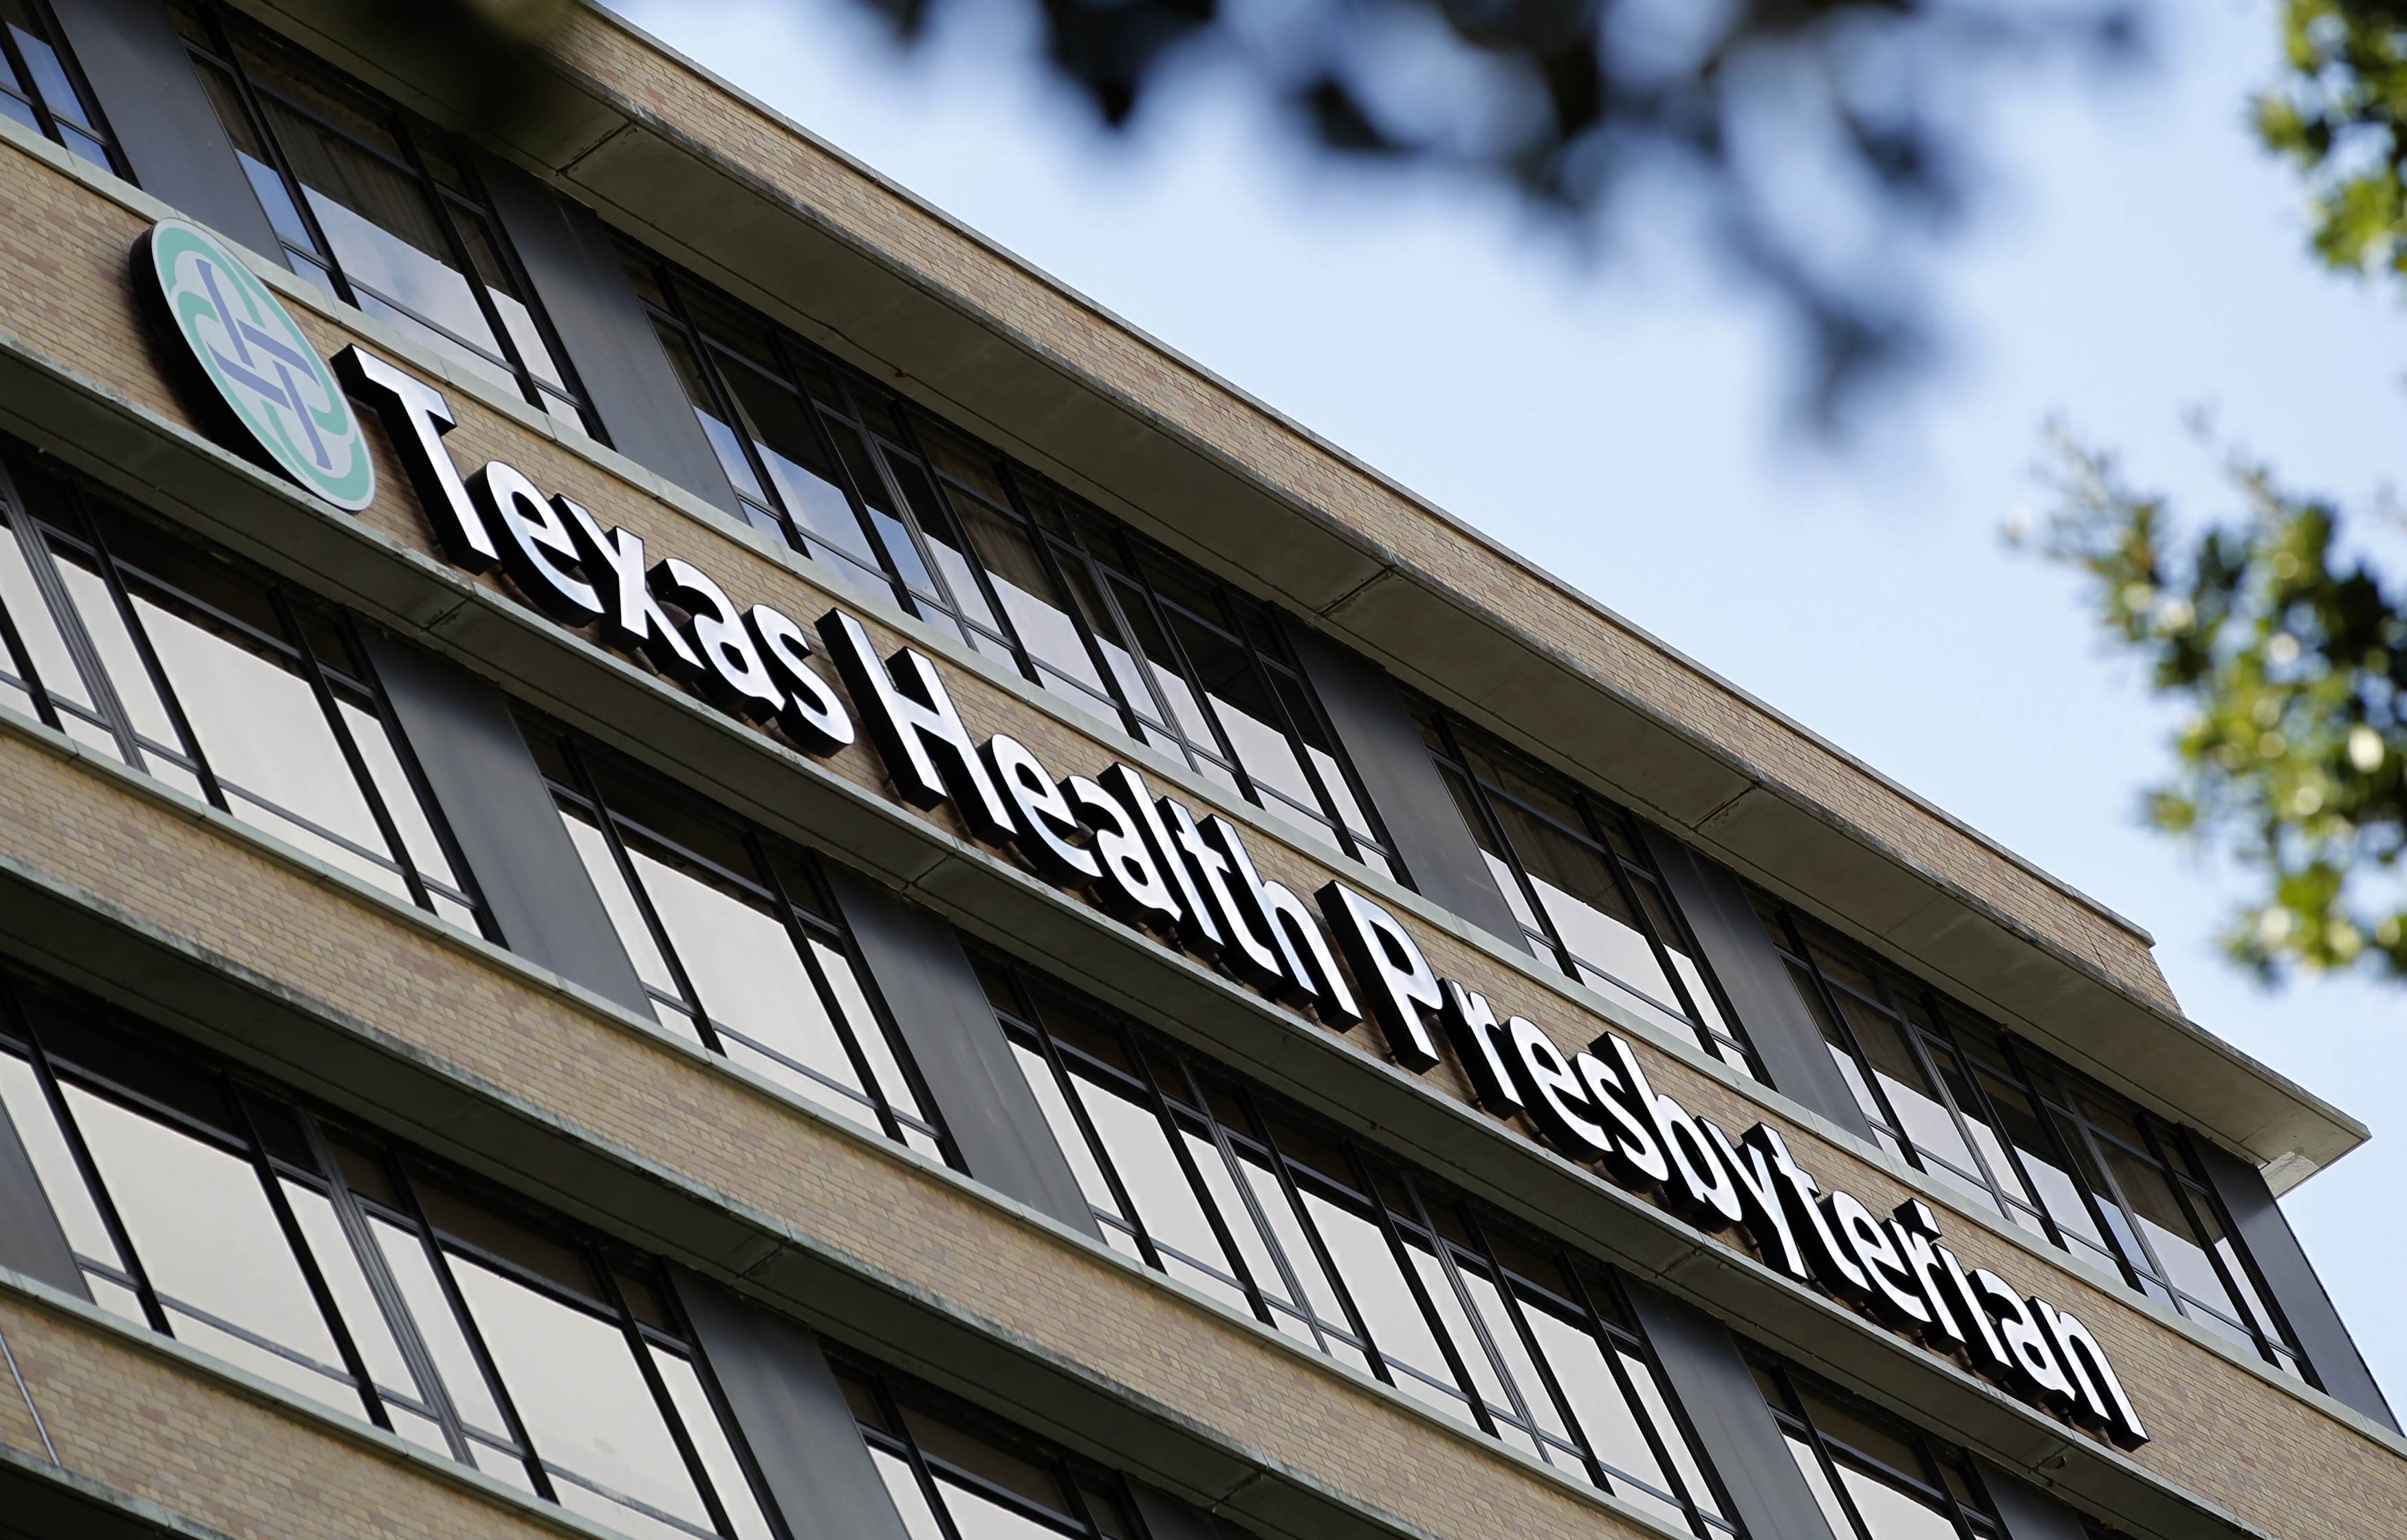 Ebola victim Thomas Eric Duncan died Wednesday morning at Texas Health Presbyterian in Dallas. (Reuters/Mike Stone)